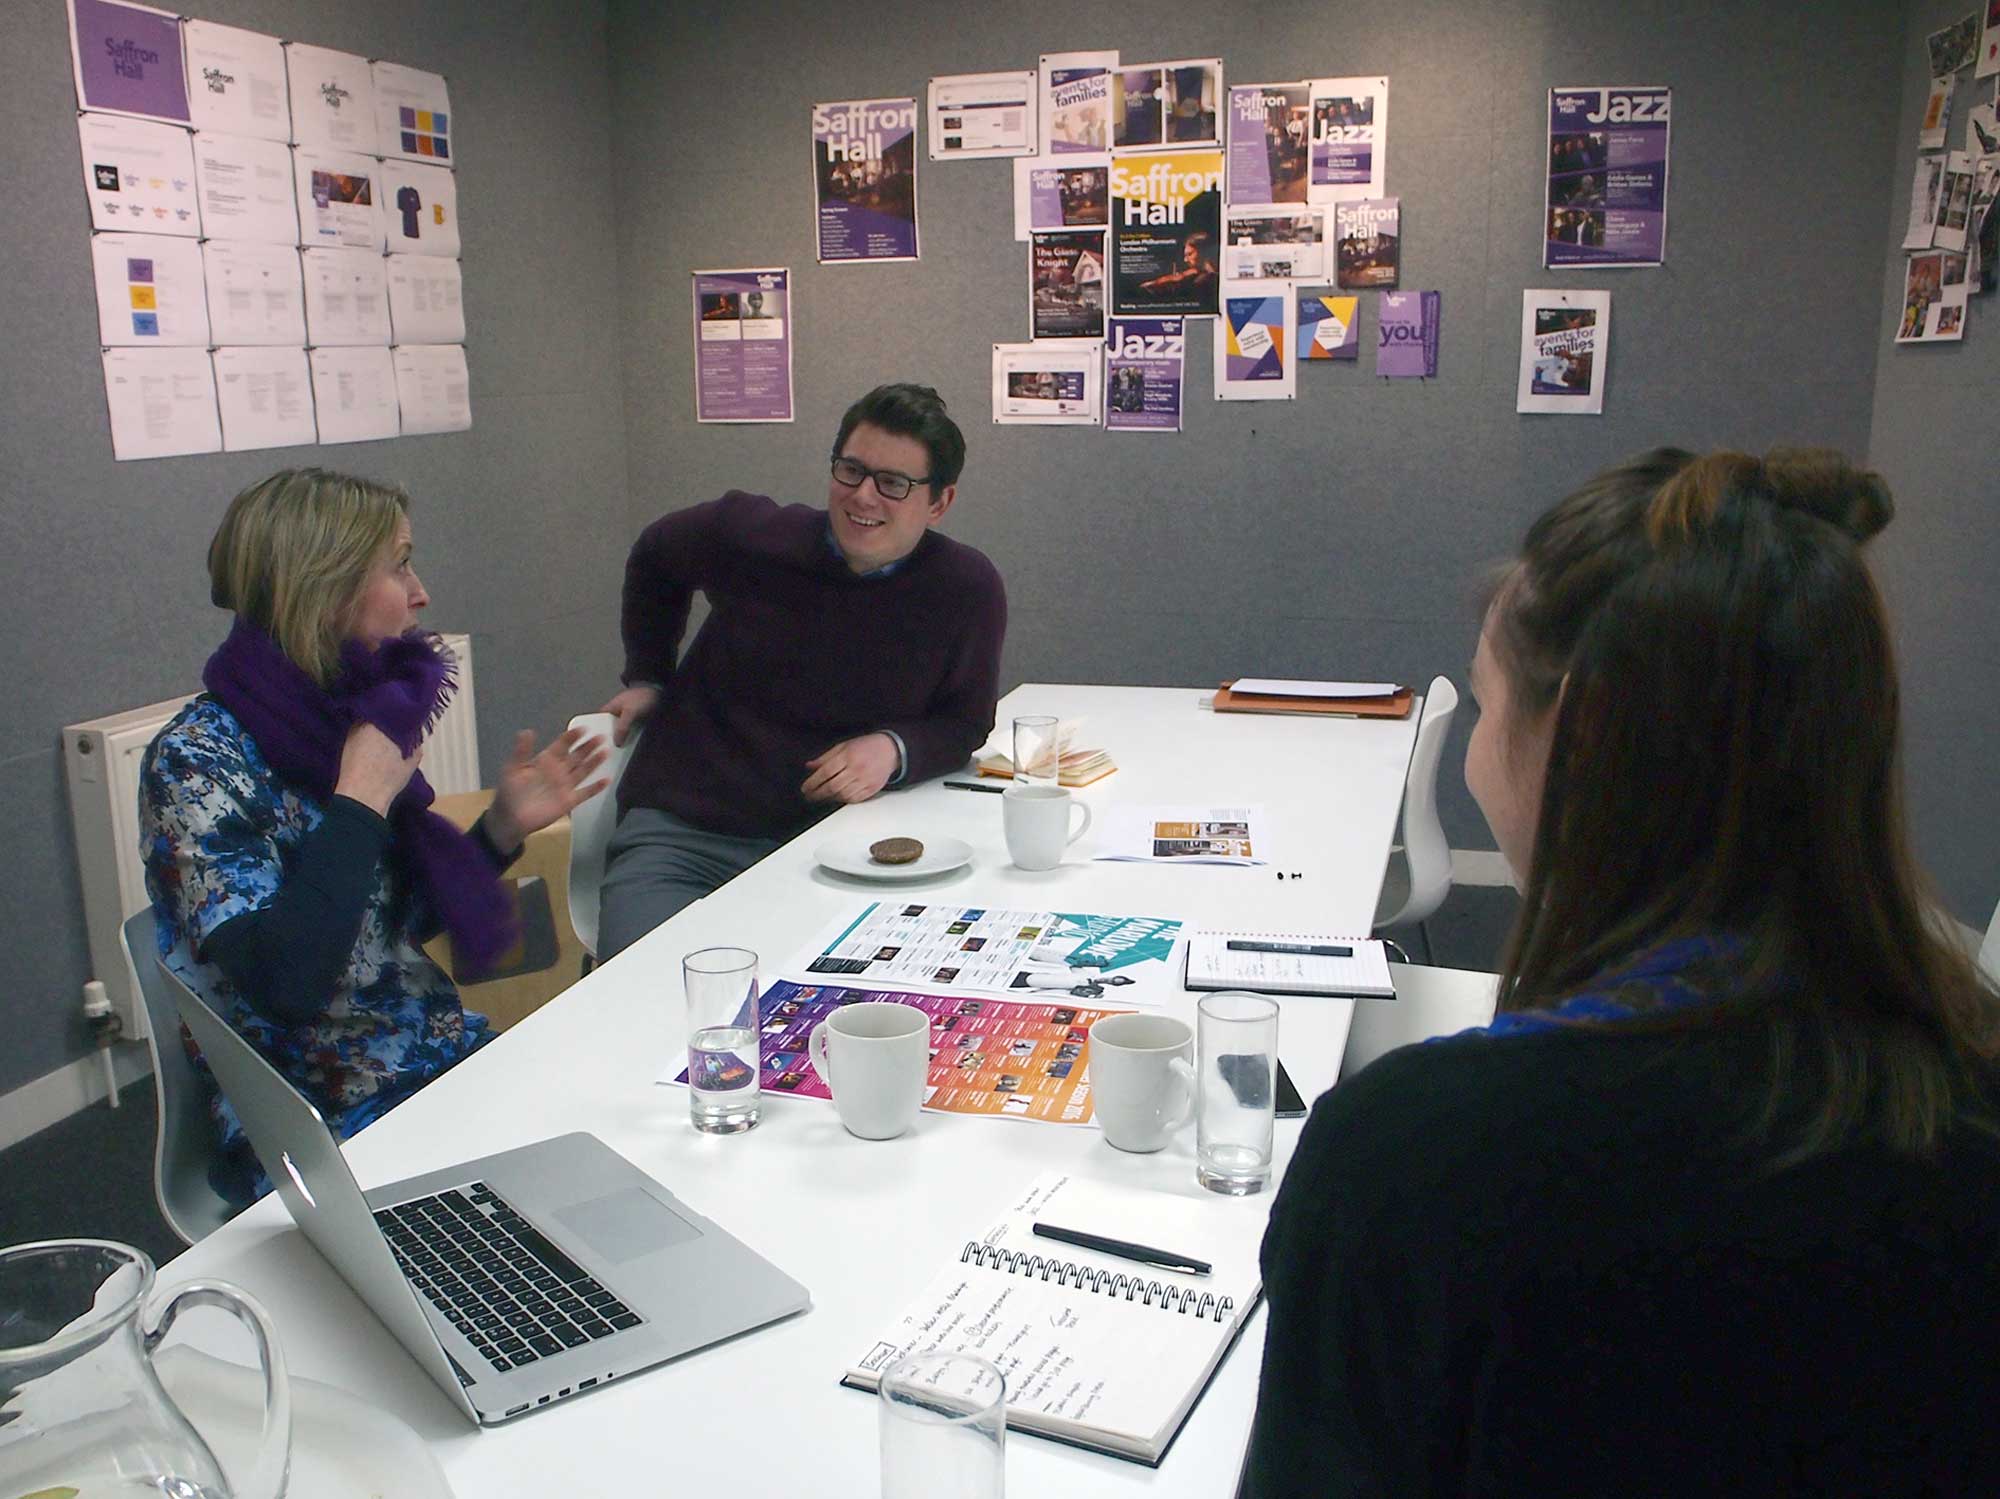 Purple-coded meeting with our client in the Cog studio.